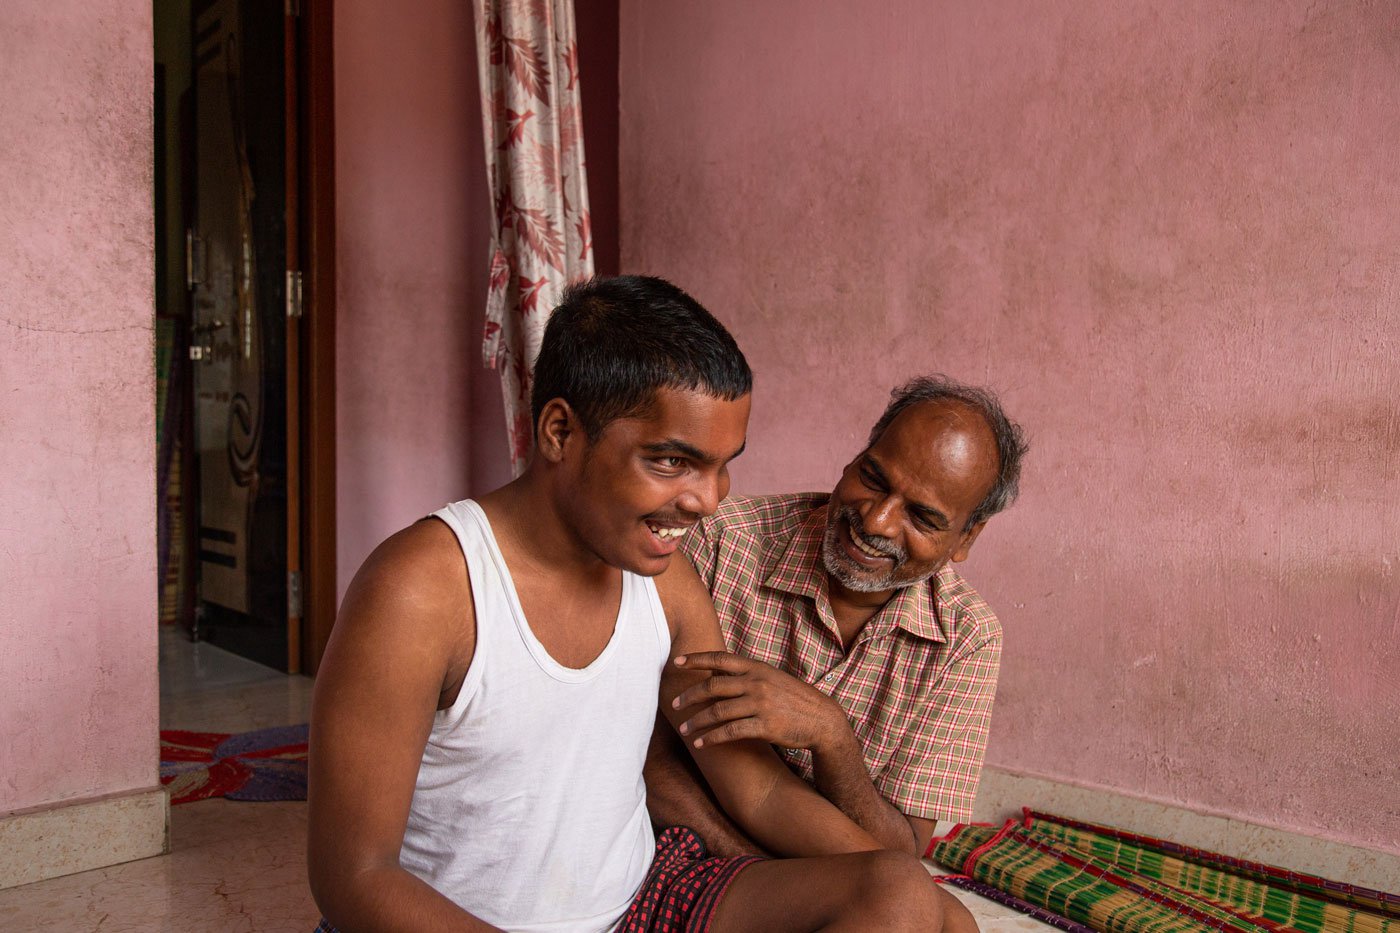 Balaraman is a loving grandfather and helps take care of the children. He works in a powerloom factory